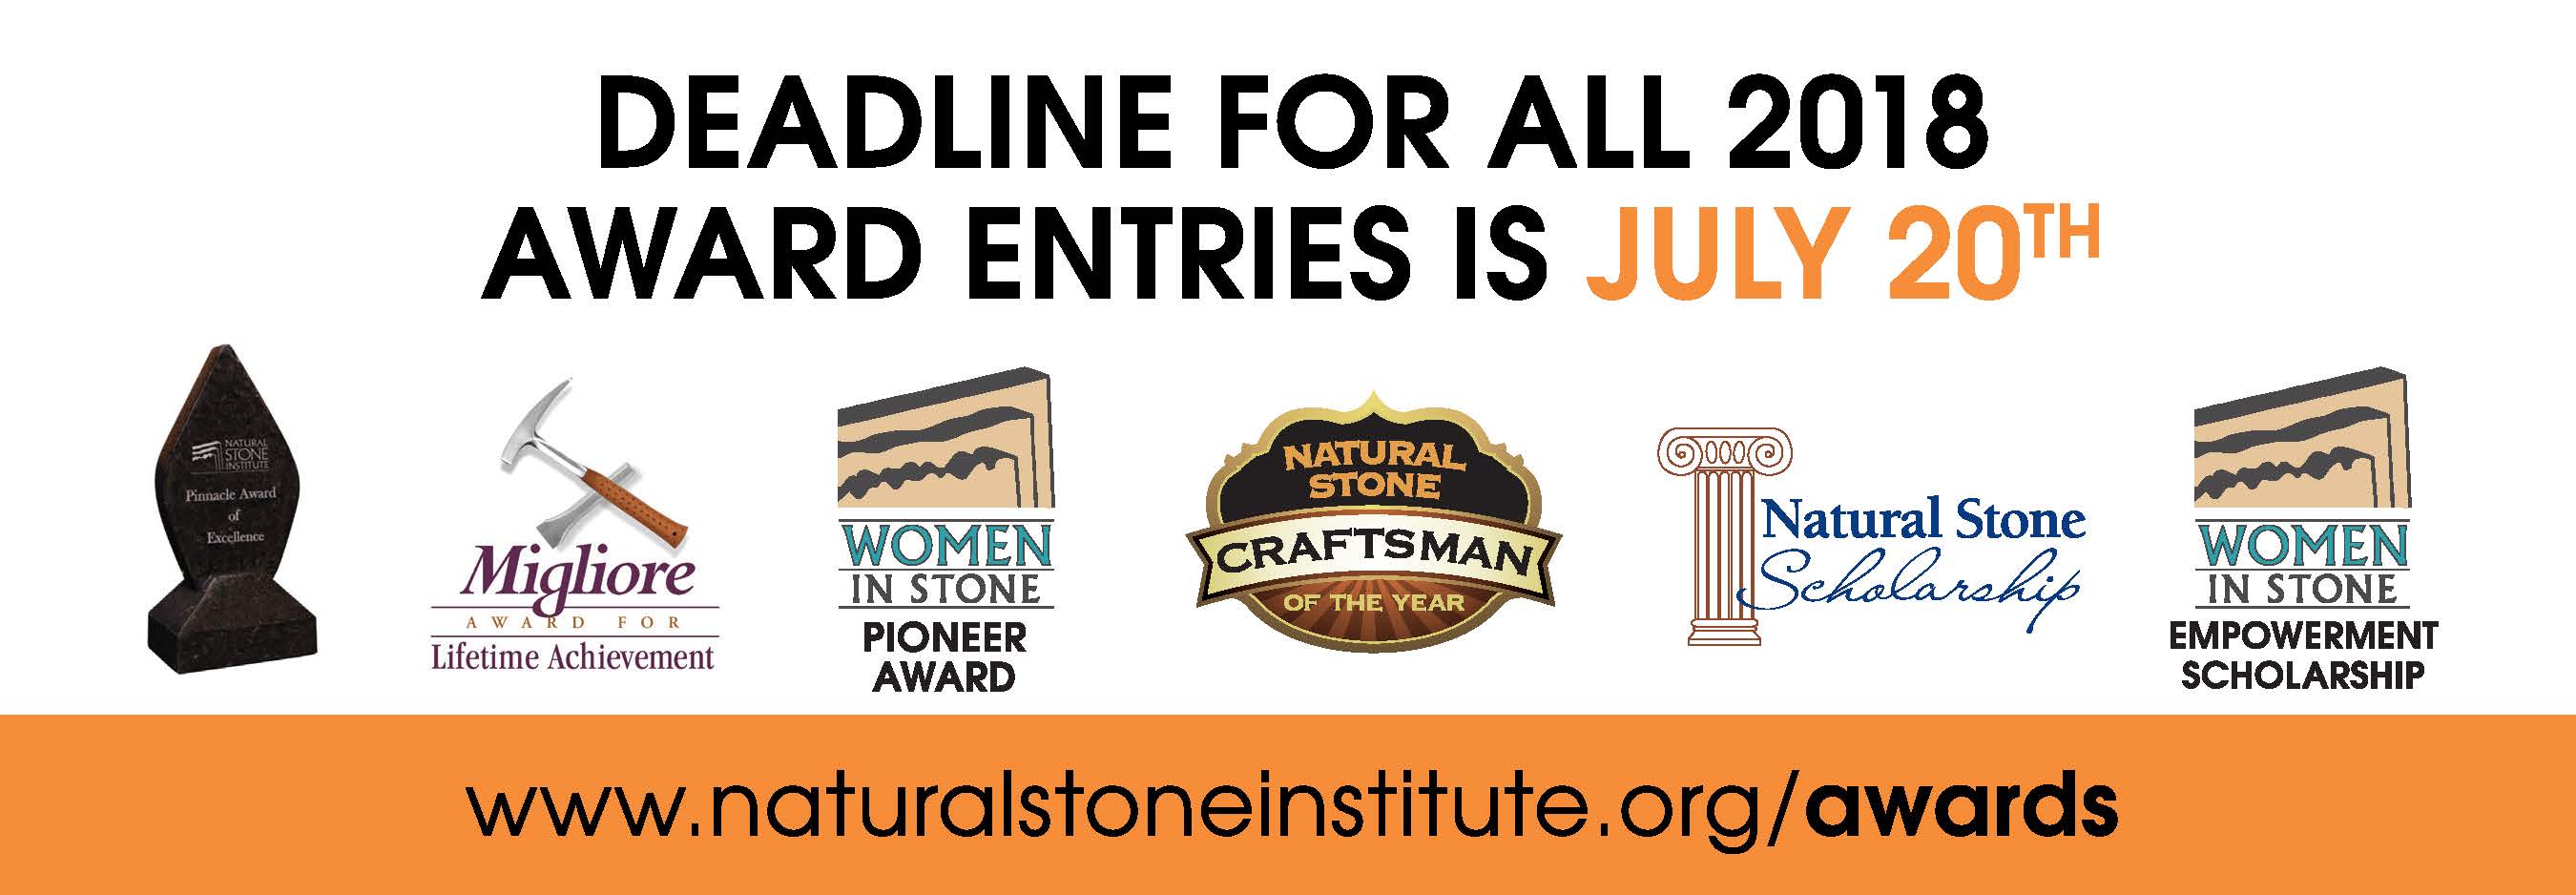 Natural Stone Institute Calls for Award Entries